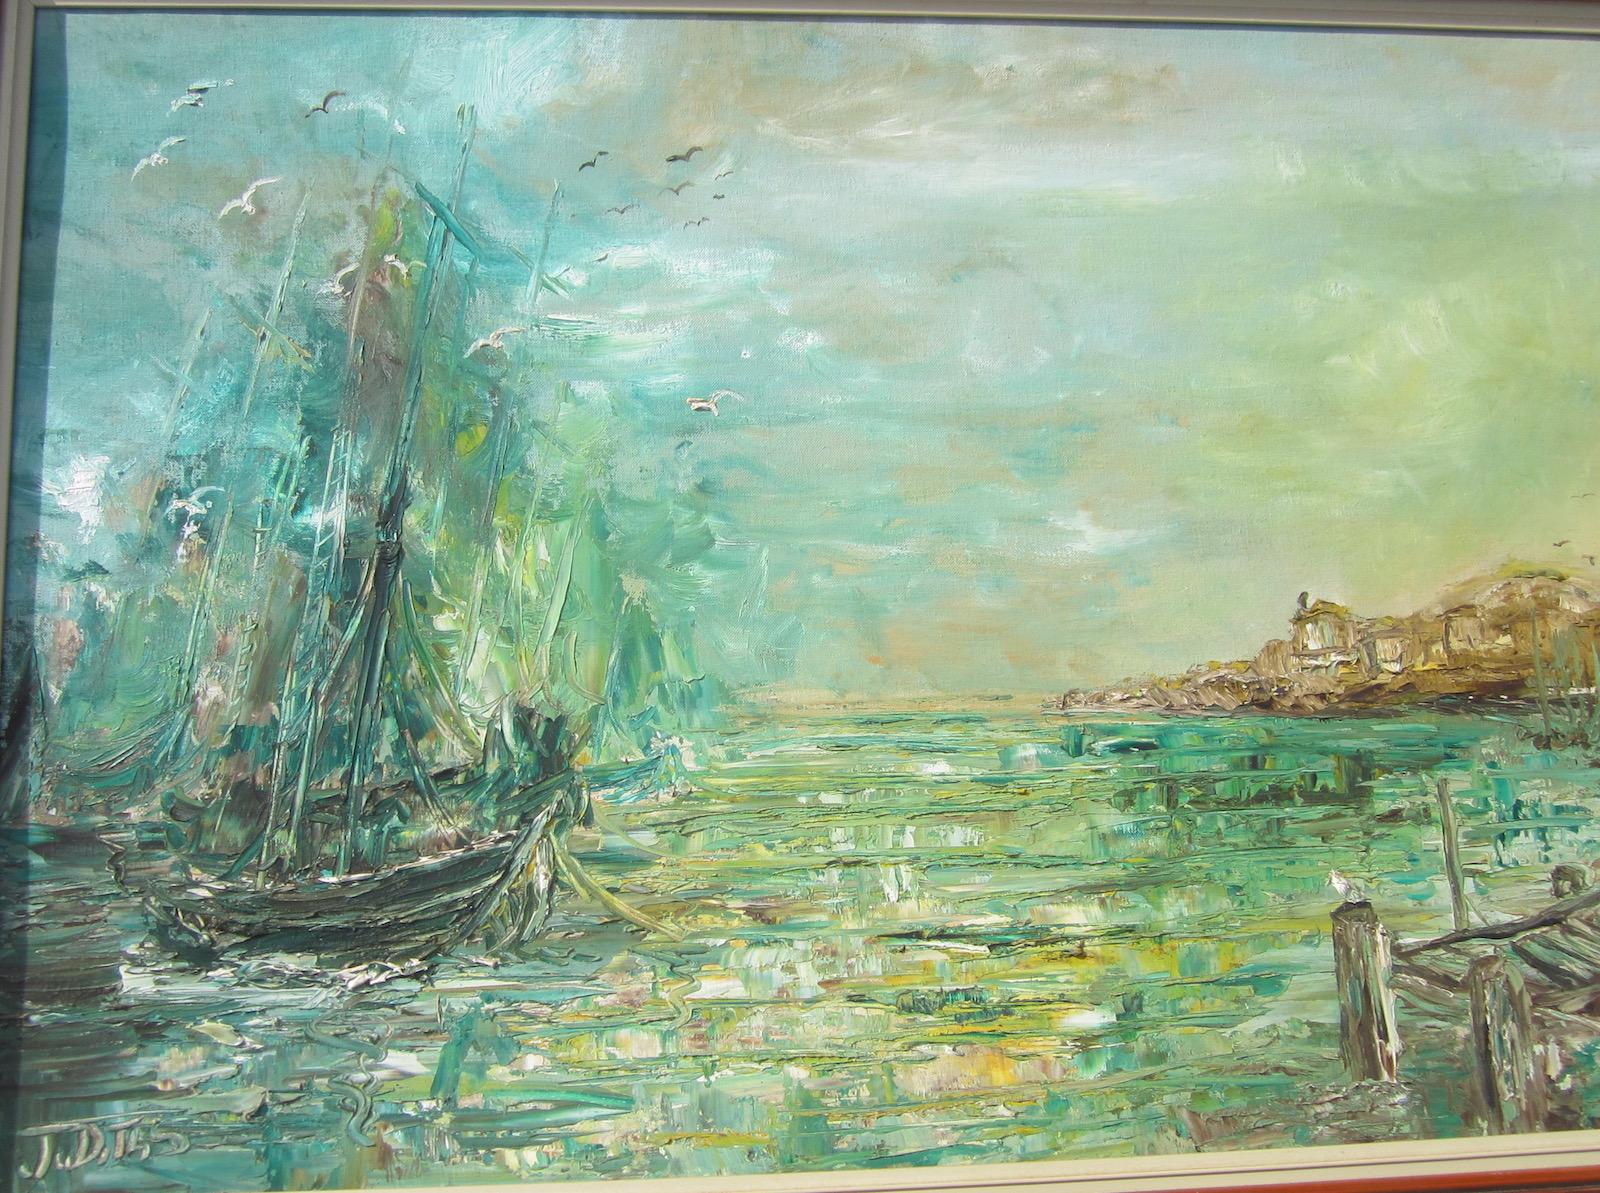 American Seascape, oil on board, 
signed JUDITH S bottom left, 
image 90 x 60cm, frame 108 x 78cm
Our eclectic stock crosses cultures, continents, styles and famous names.